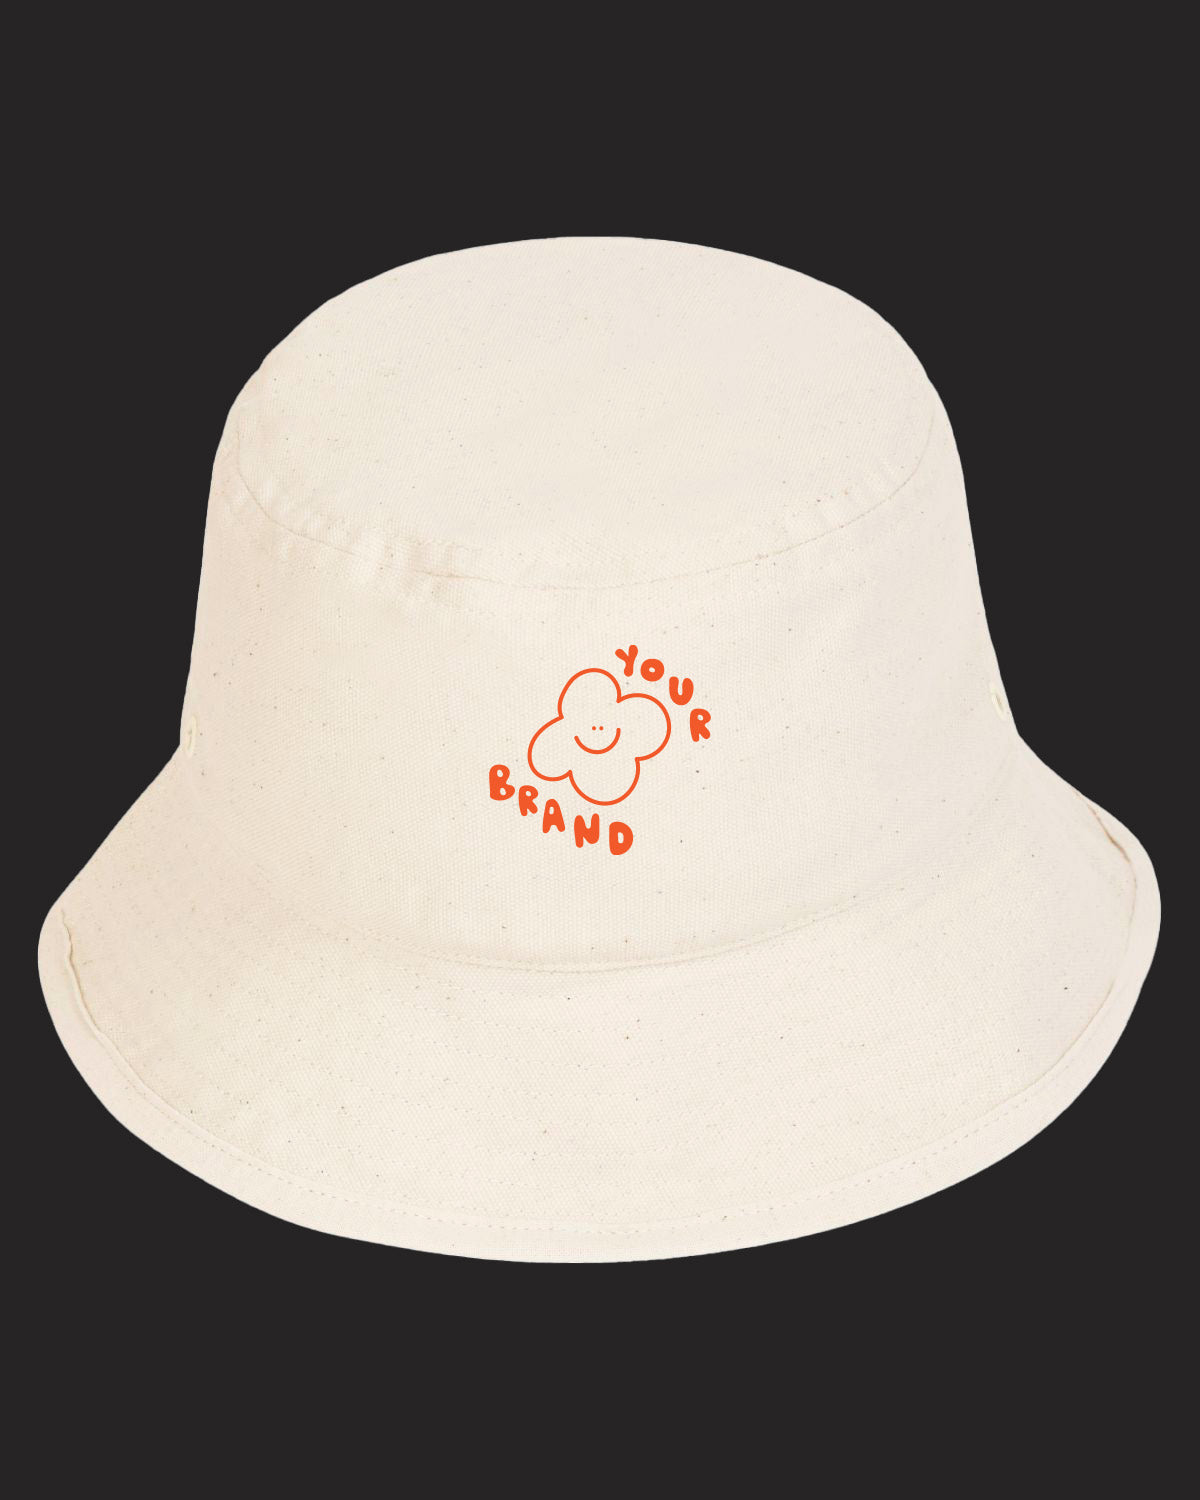 customize your own sustainable bucket hat